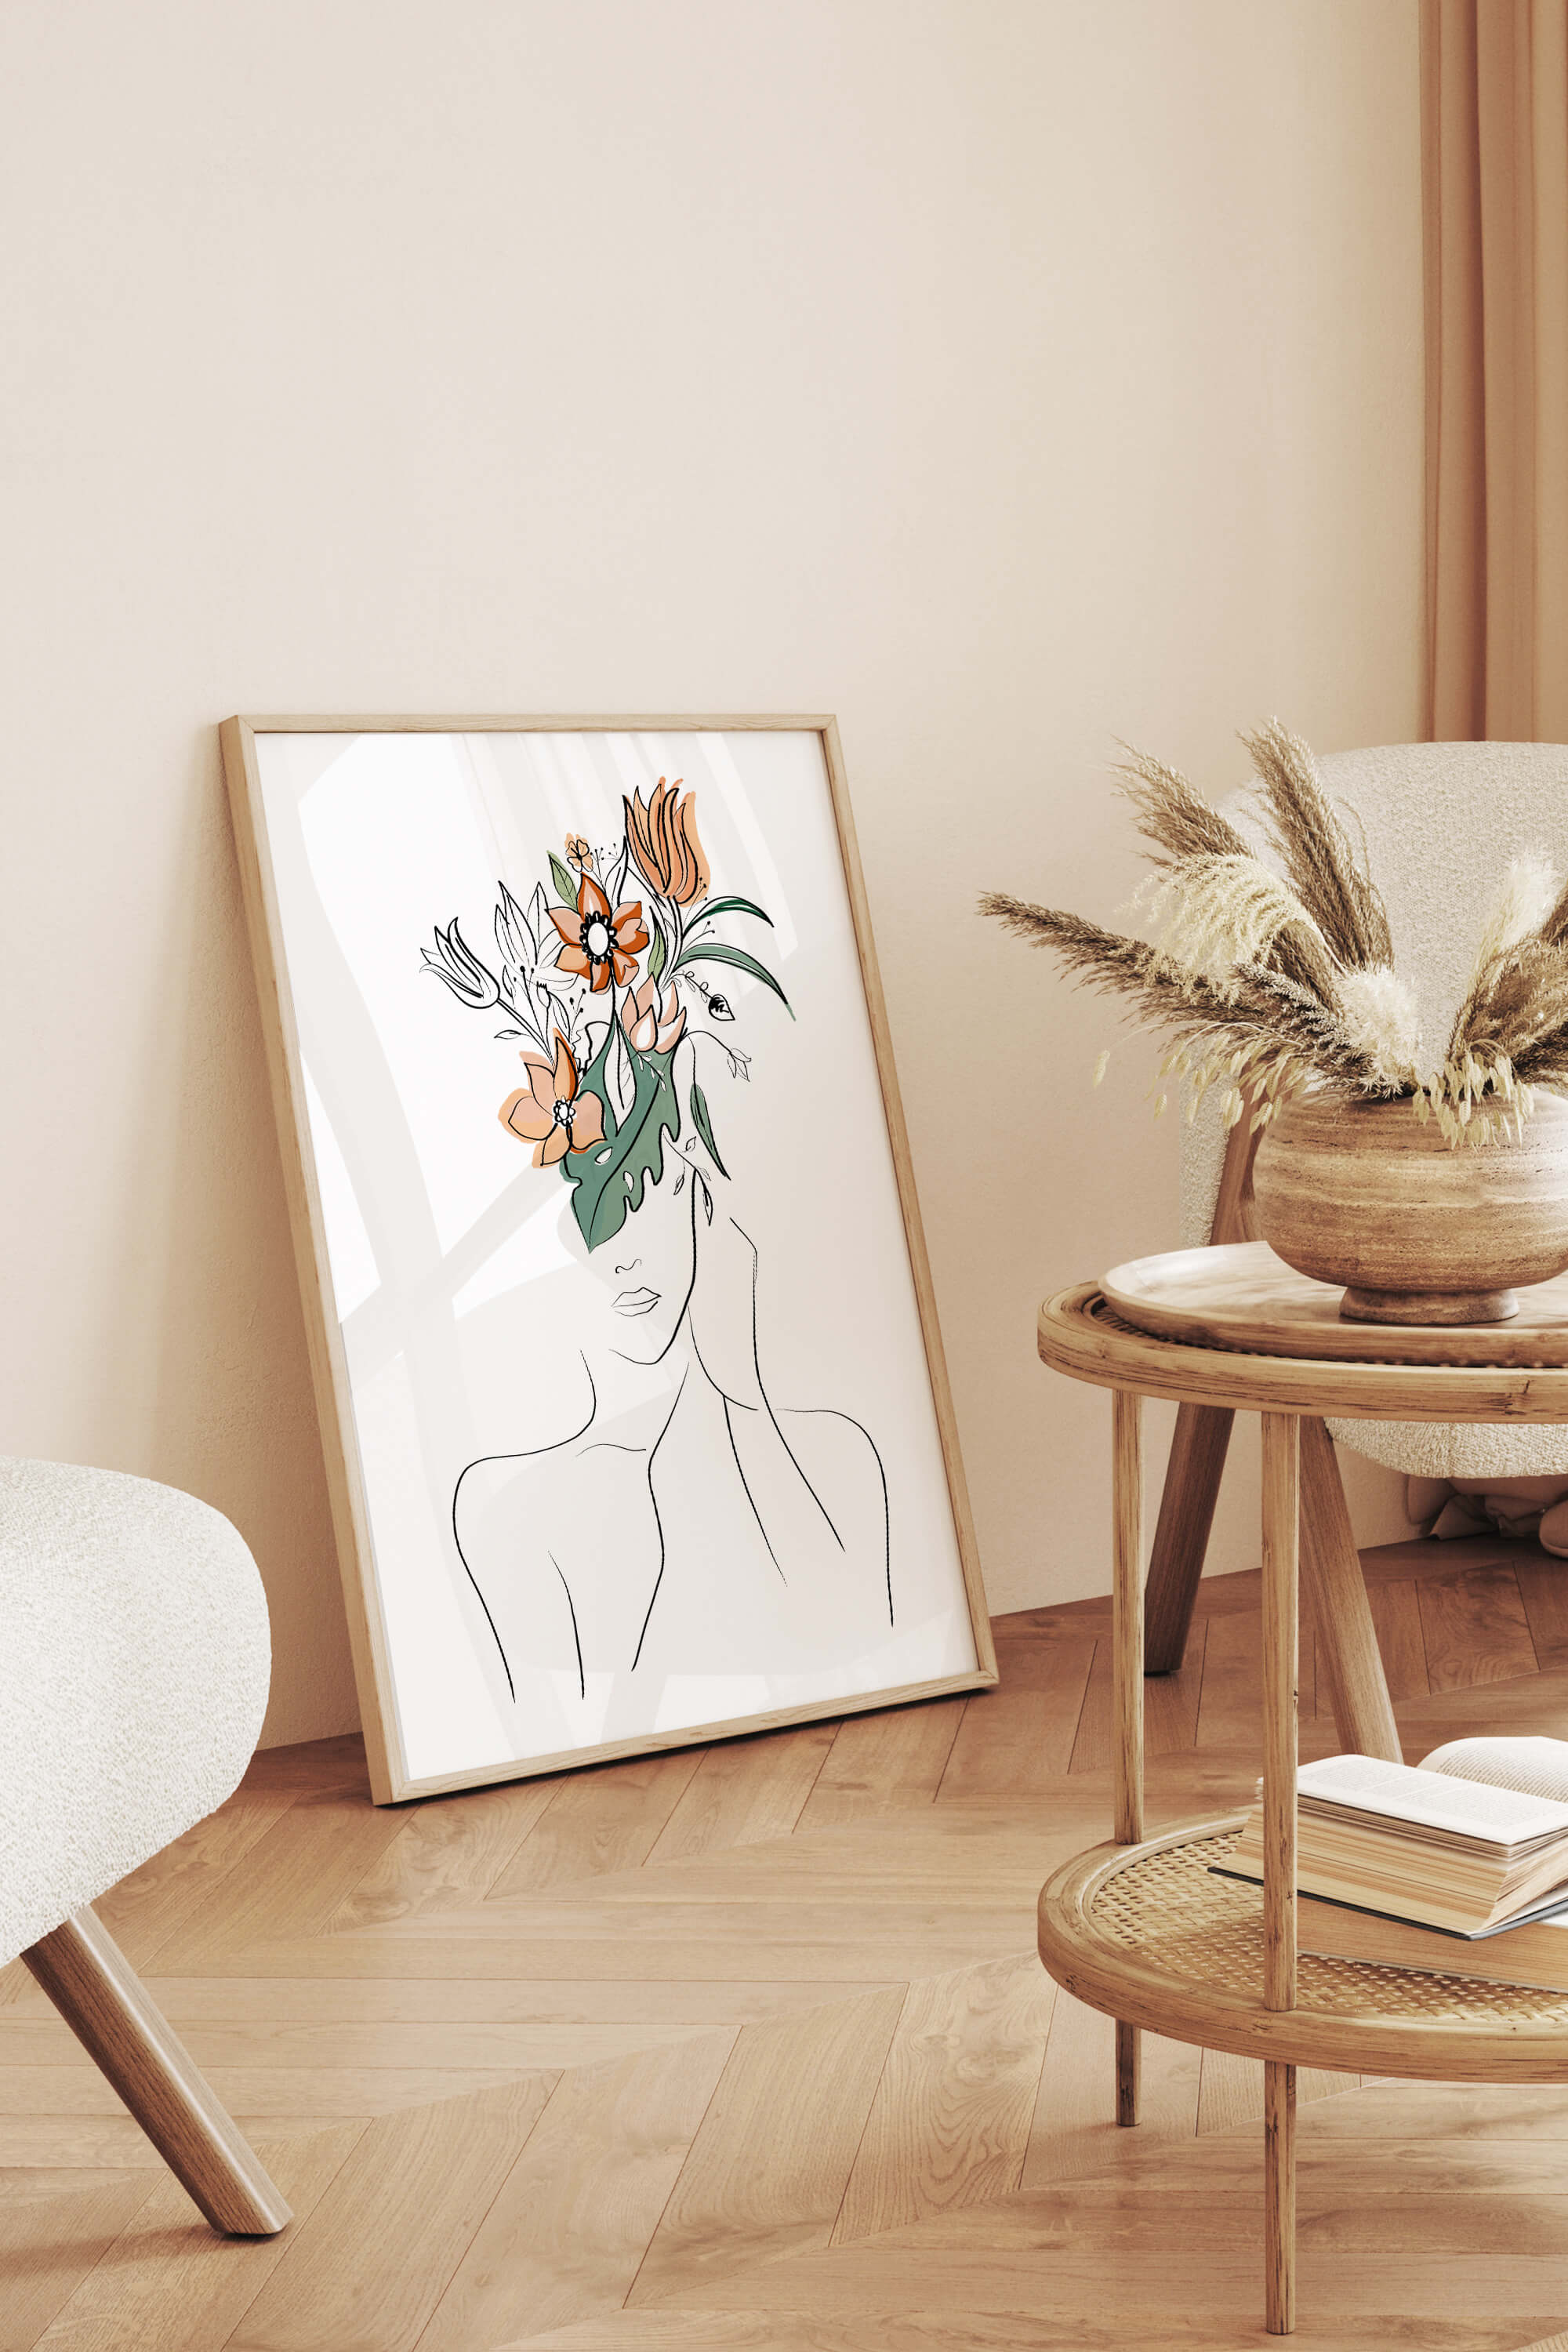 Modern Feminine Body Line Drawing Art, capturing the essence of a woman's figure with a stylish flower head motif.